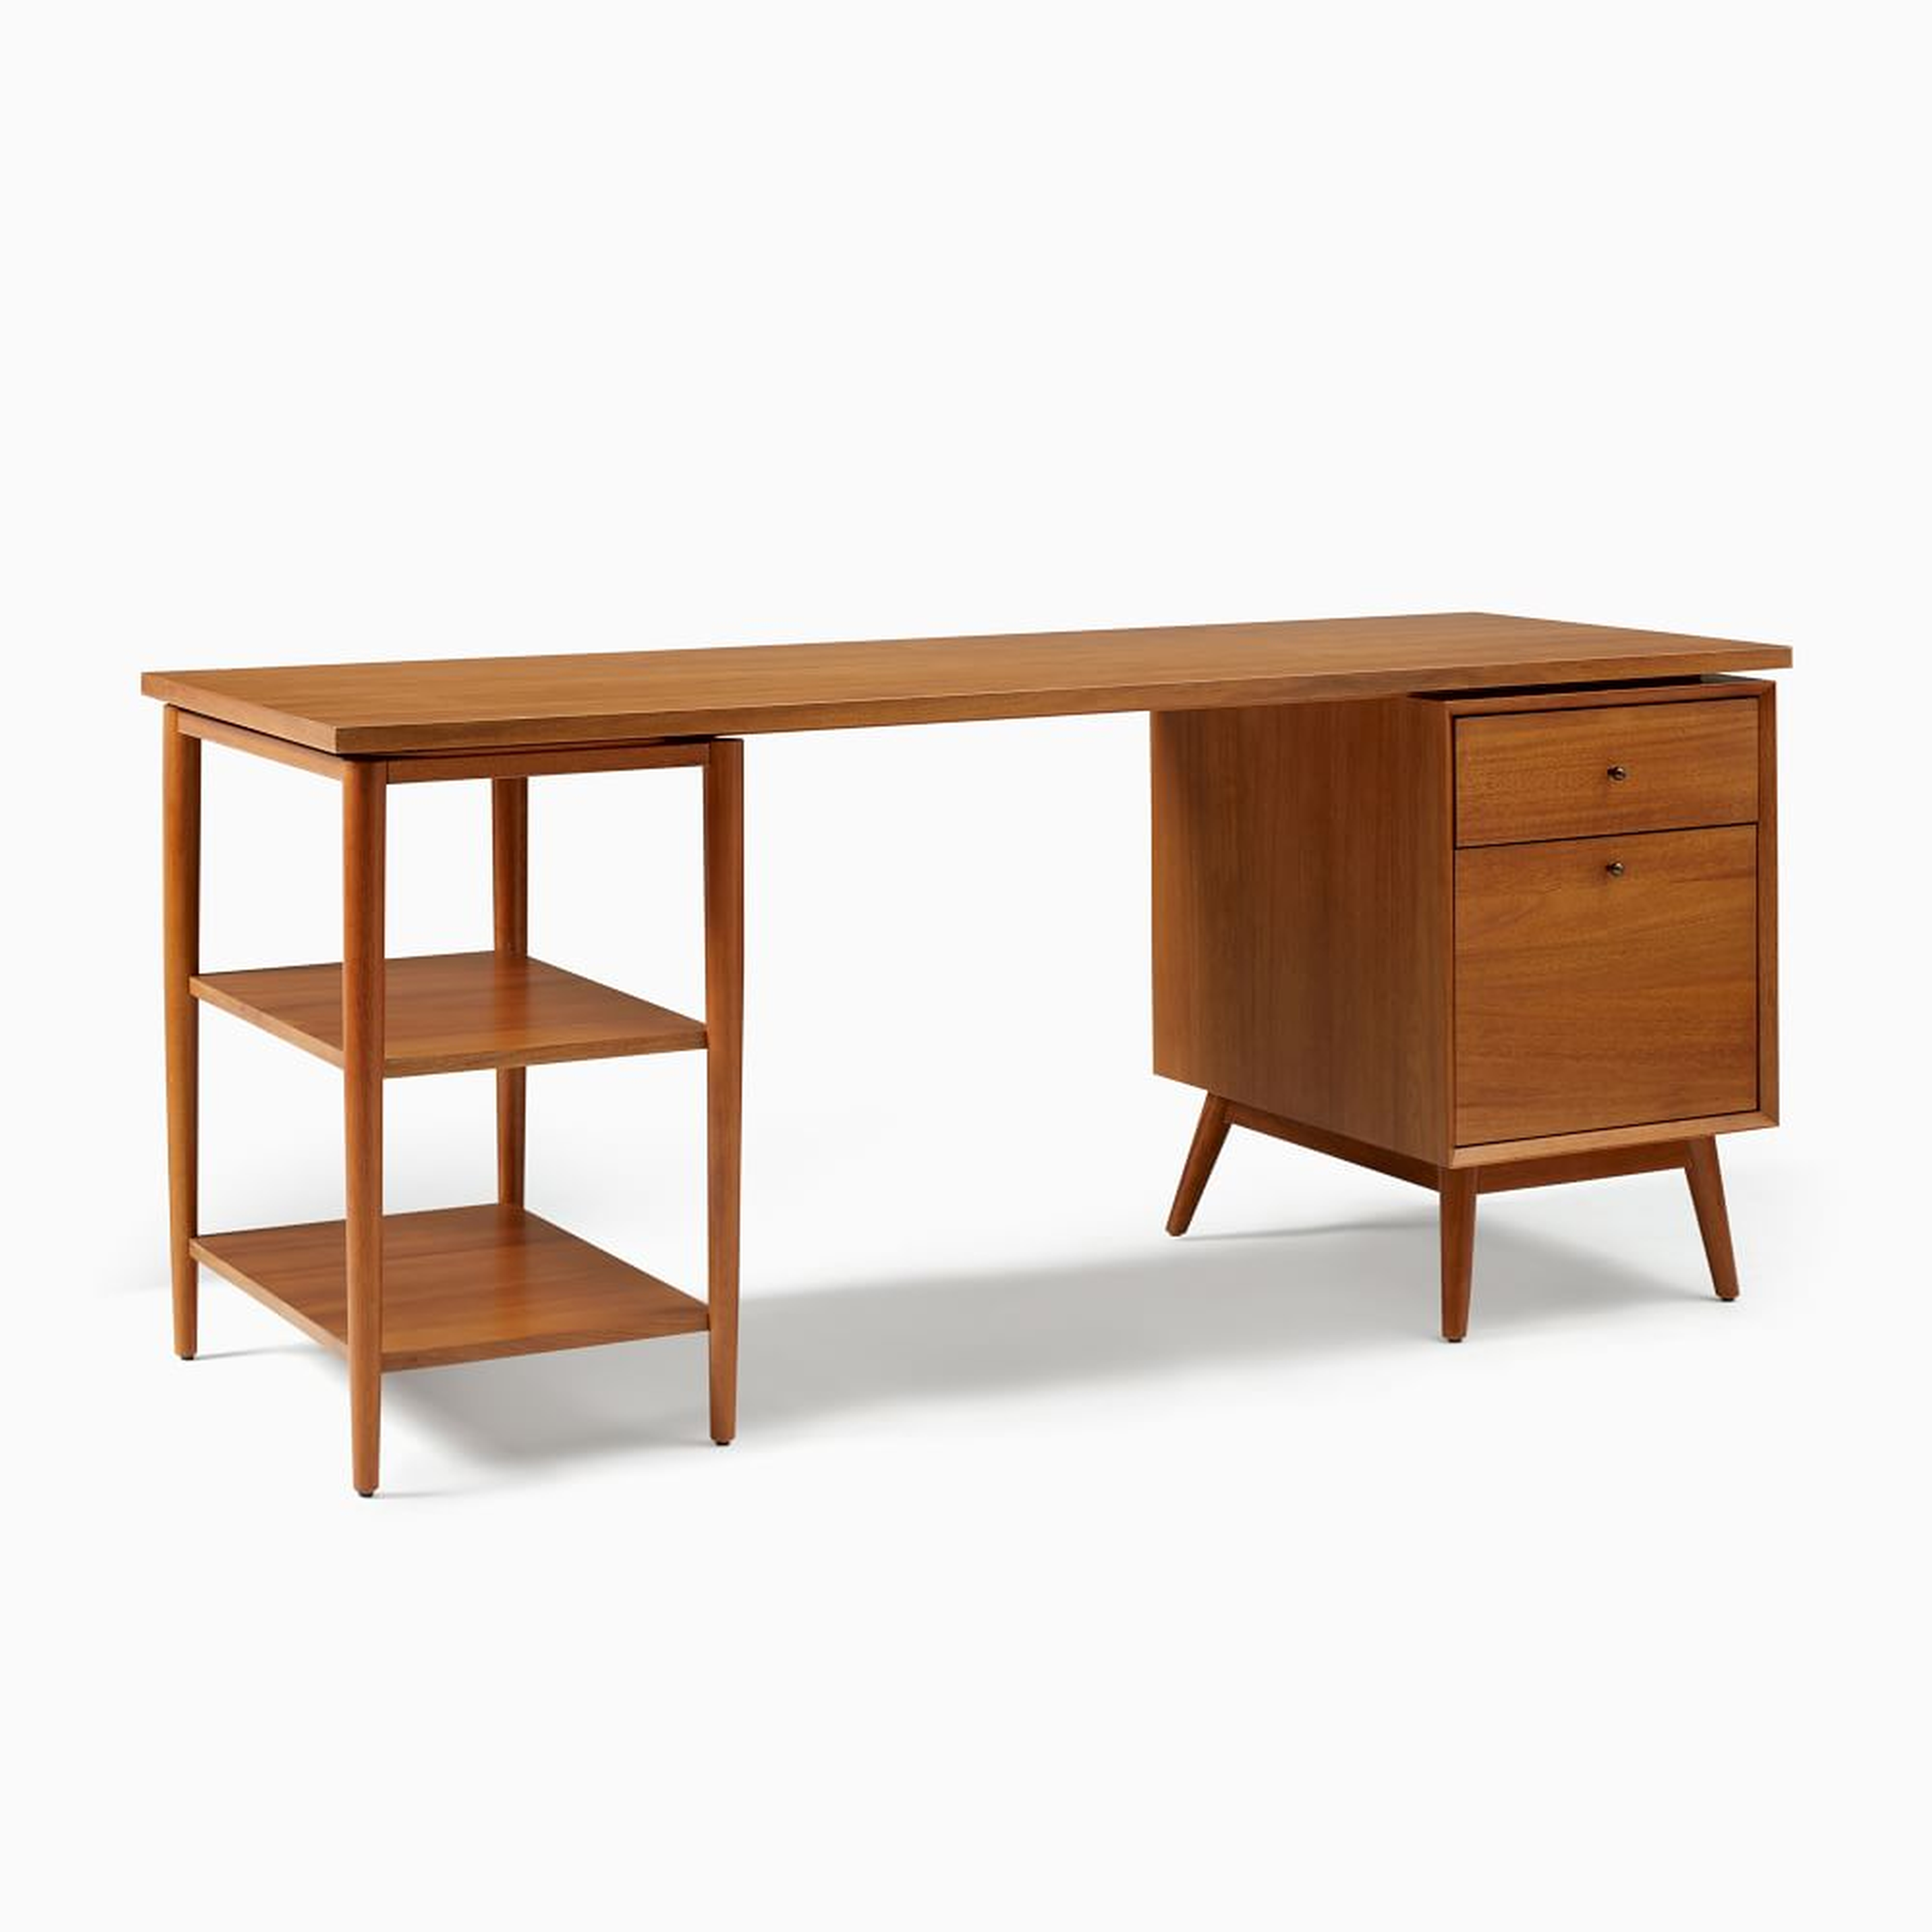 We Mid Century Collection Acorn Modular Set Desktop And Open Storage Case And File - West Elm